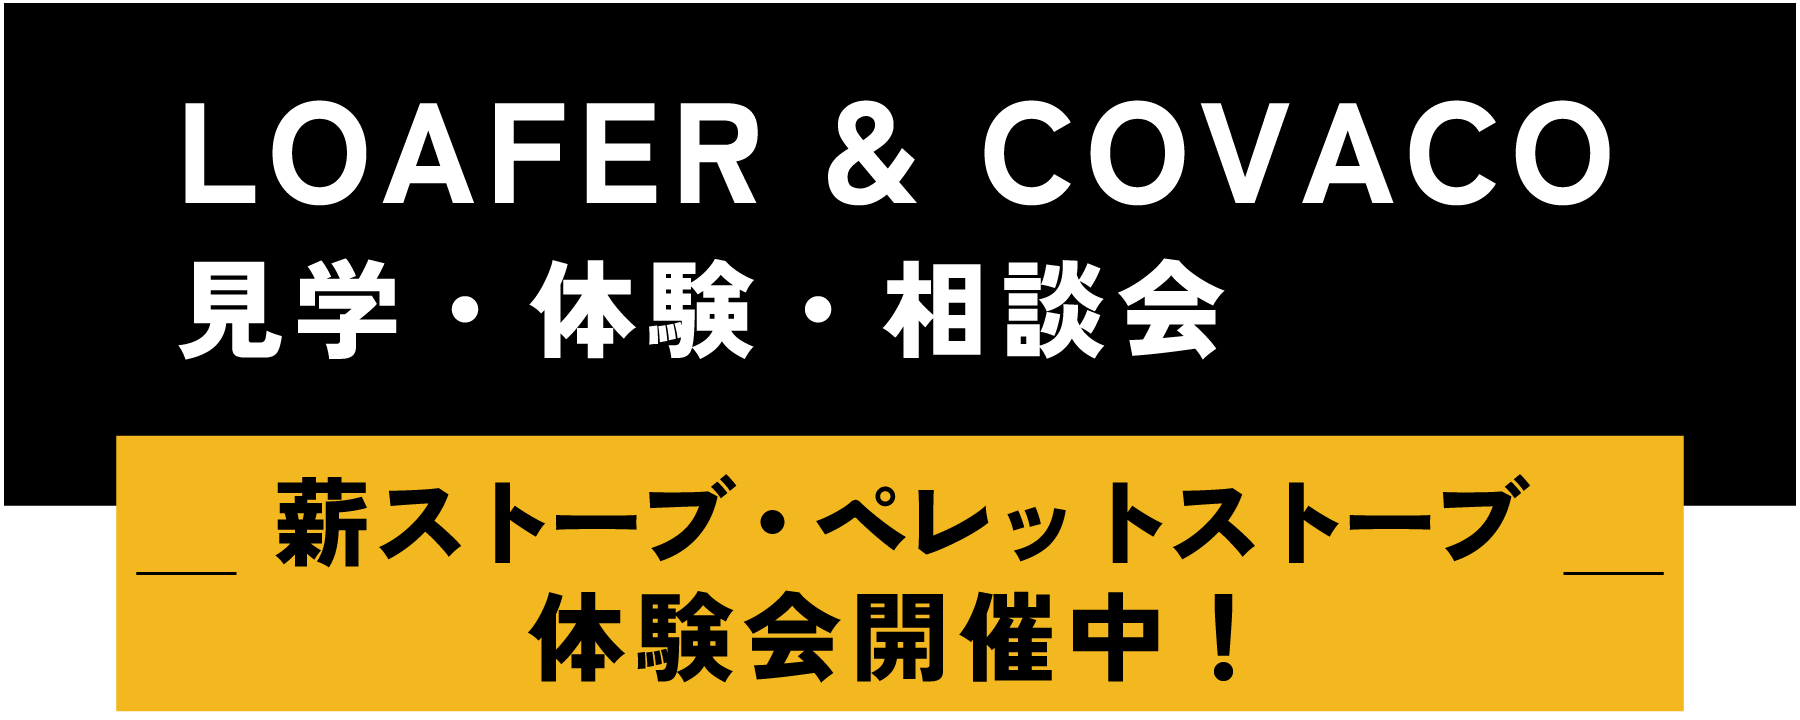 LOAFER & COVACO 見学・体験・相談会—薪ストーブ・ペレットストーブ体験会開催中！—